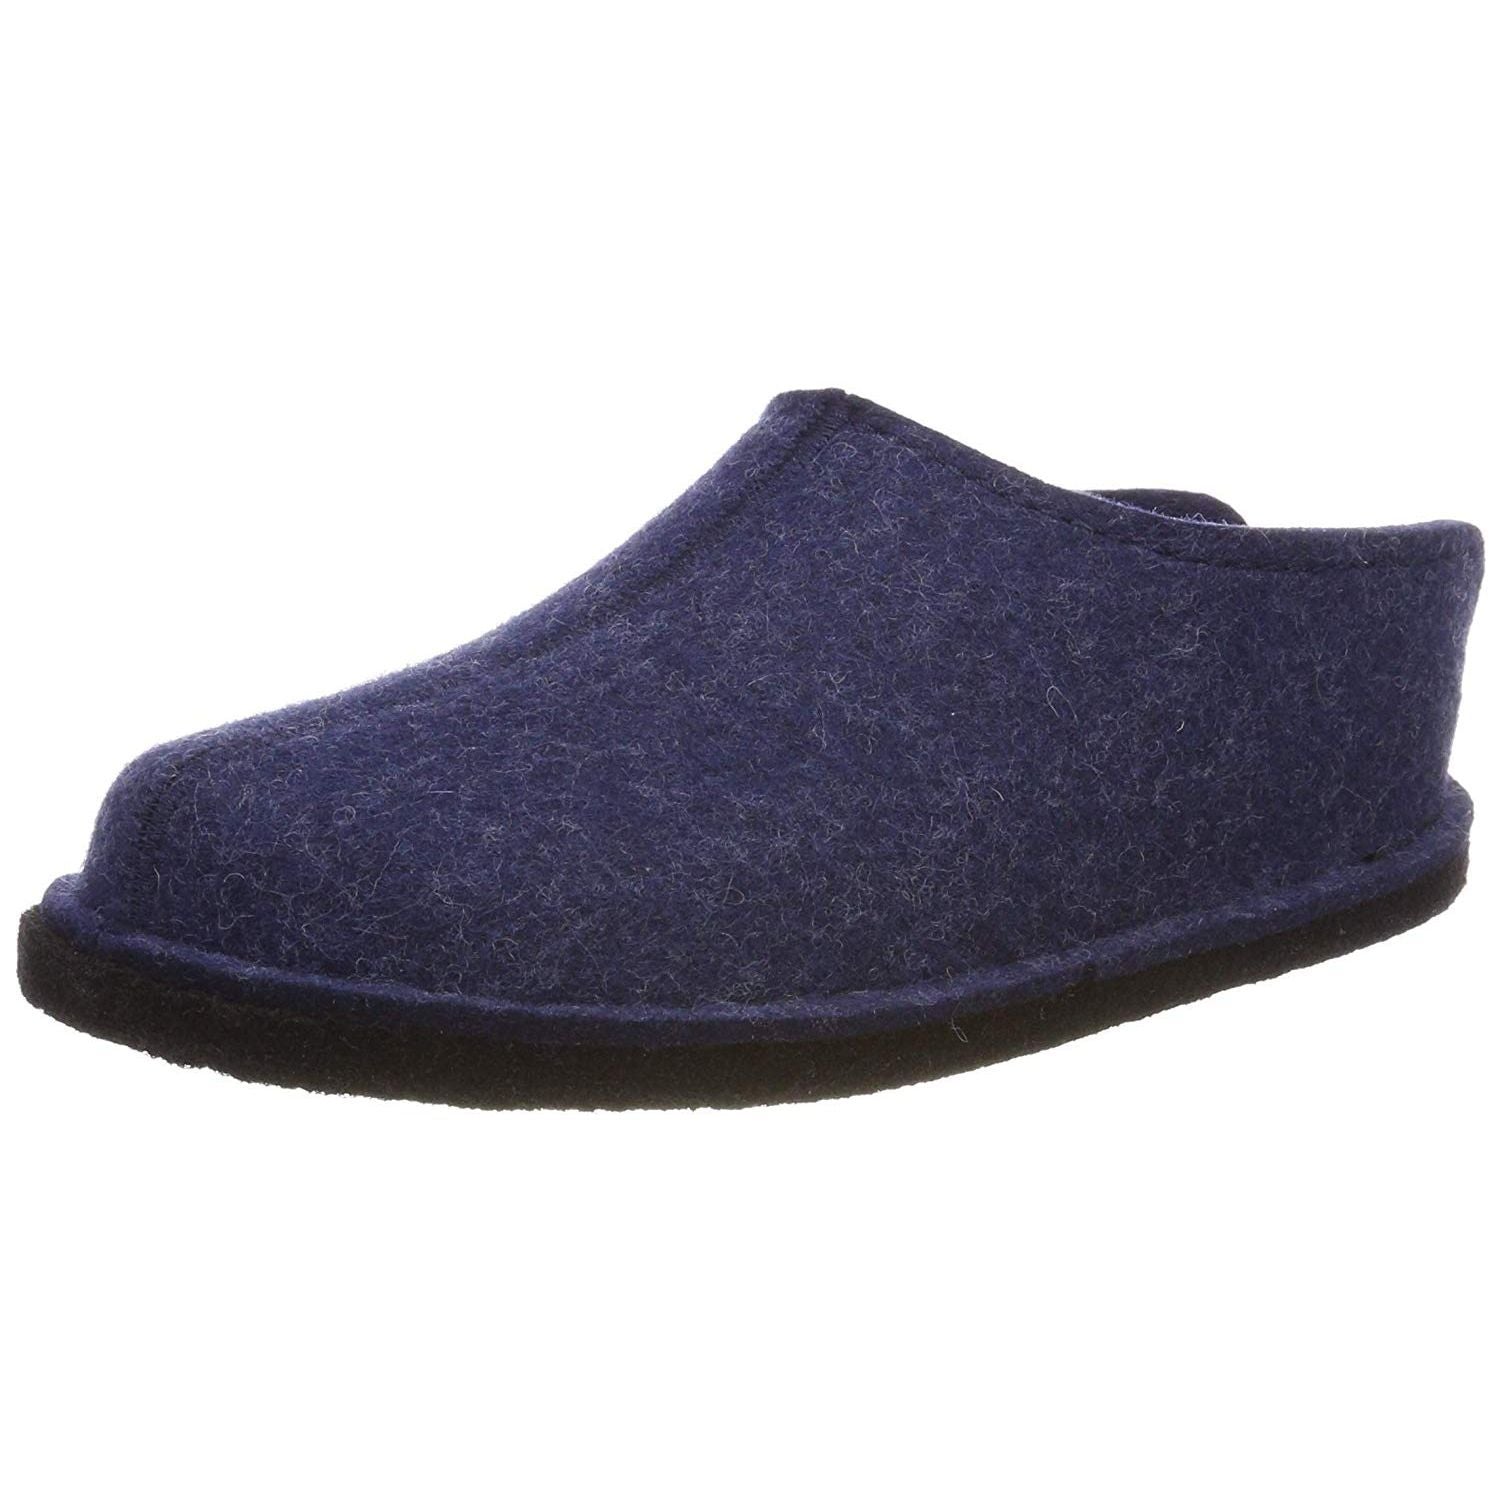 Haflinger Flair Slippers Clogs Mules Wool Felt Scuffs Slip On House Shoes Navy - Bartel-Shop